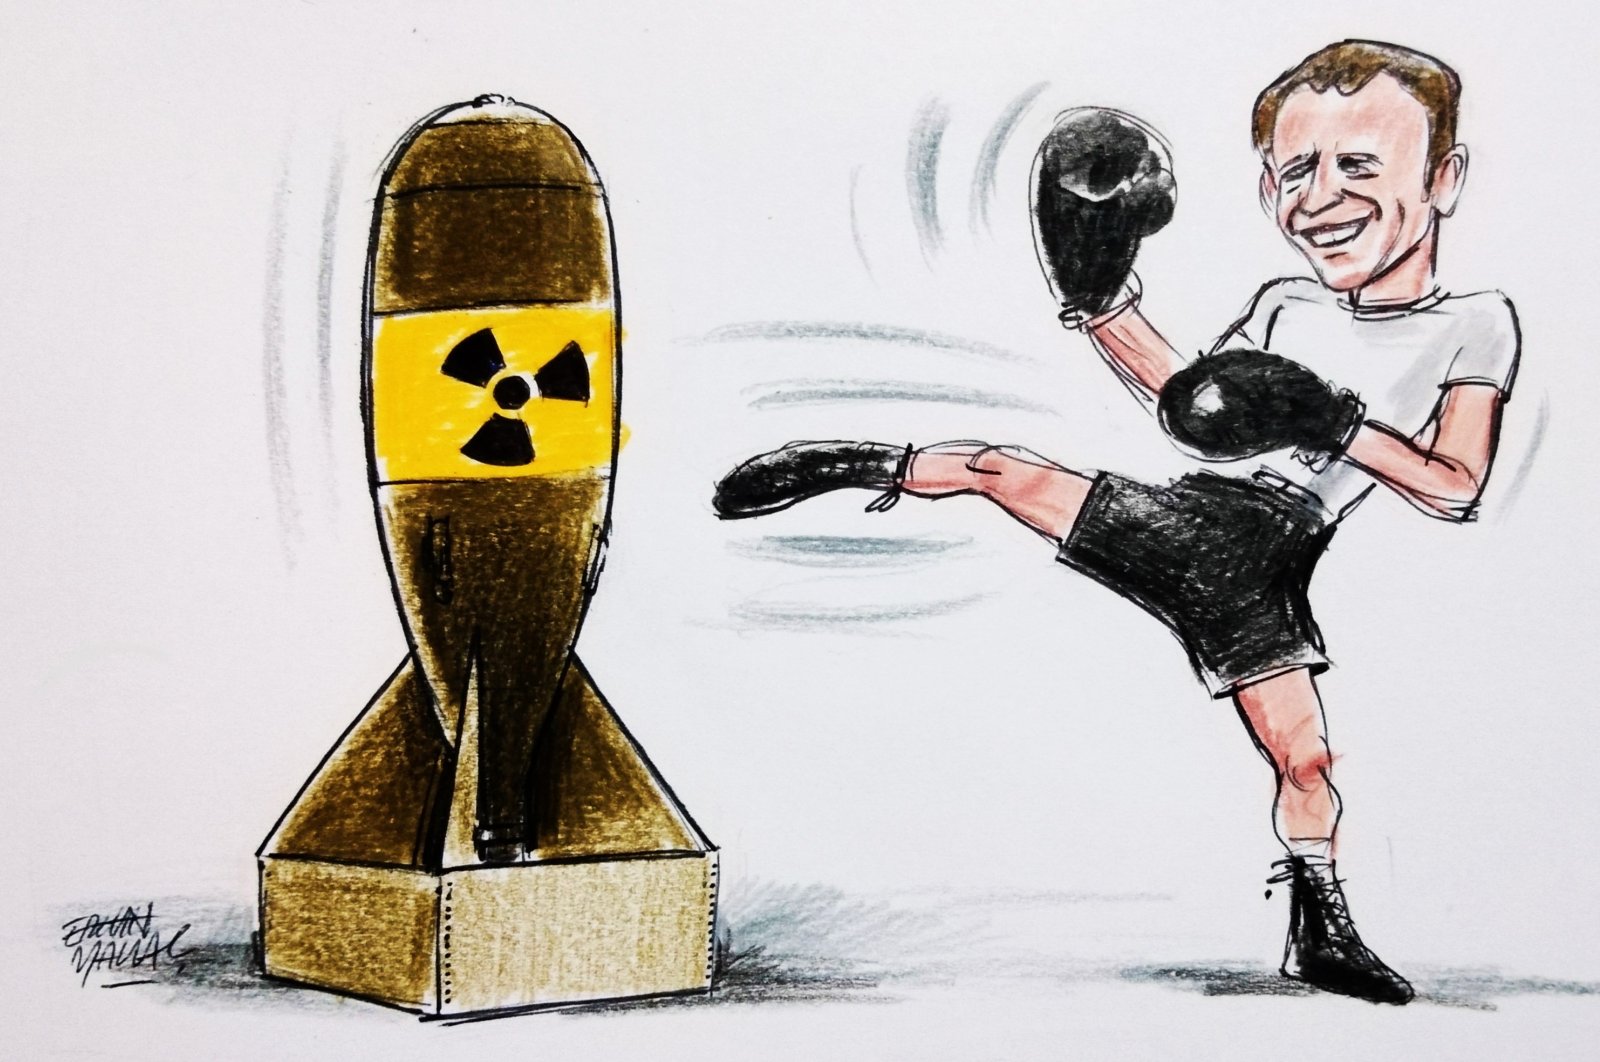 &quot;Having brought up the threat of nuclear war periodically during the Russo-Ukrainian war, the Russian leader mentioned World War III due to French President Emmanuel Macron mentioning the possibility of sending NATO troops into Ukraine.&quot; (Illustration by Erhan Yalvaç)